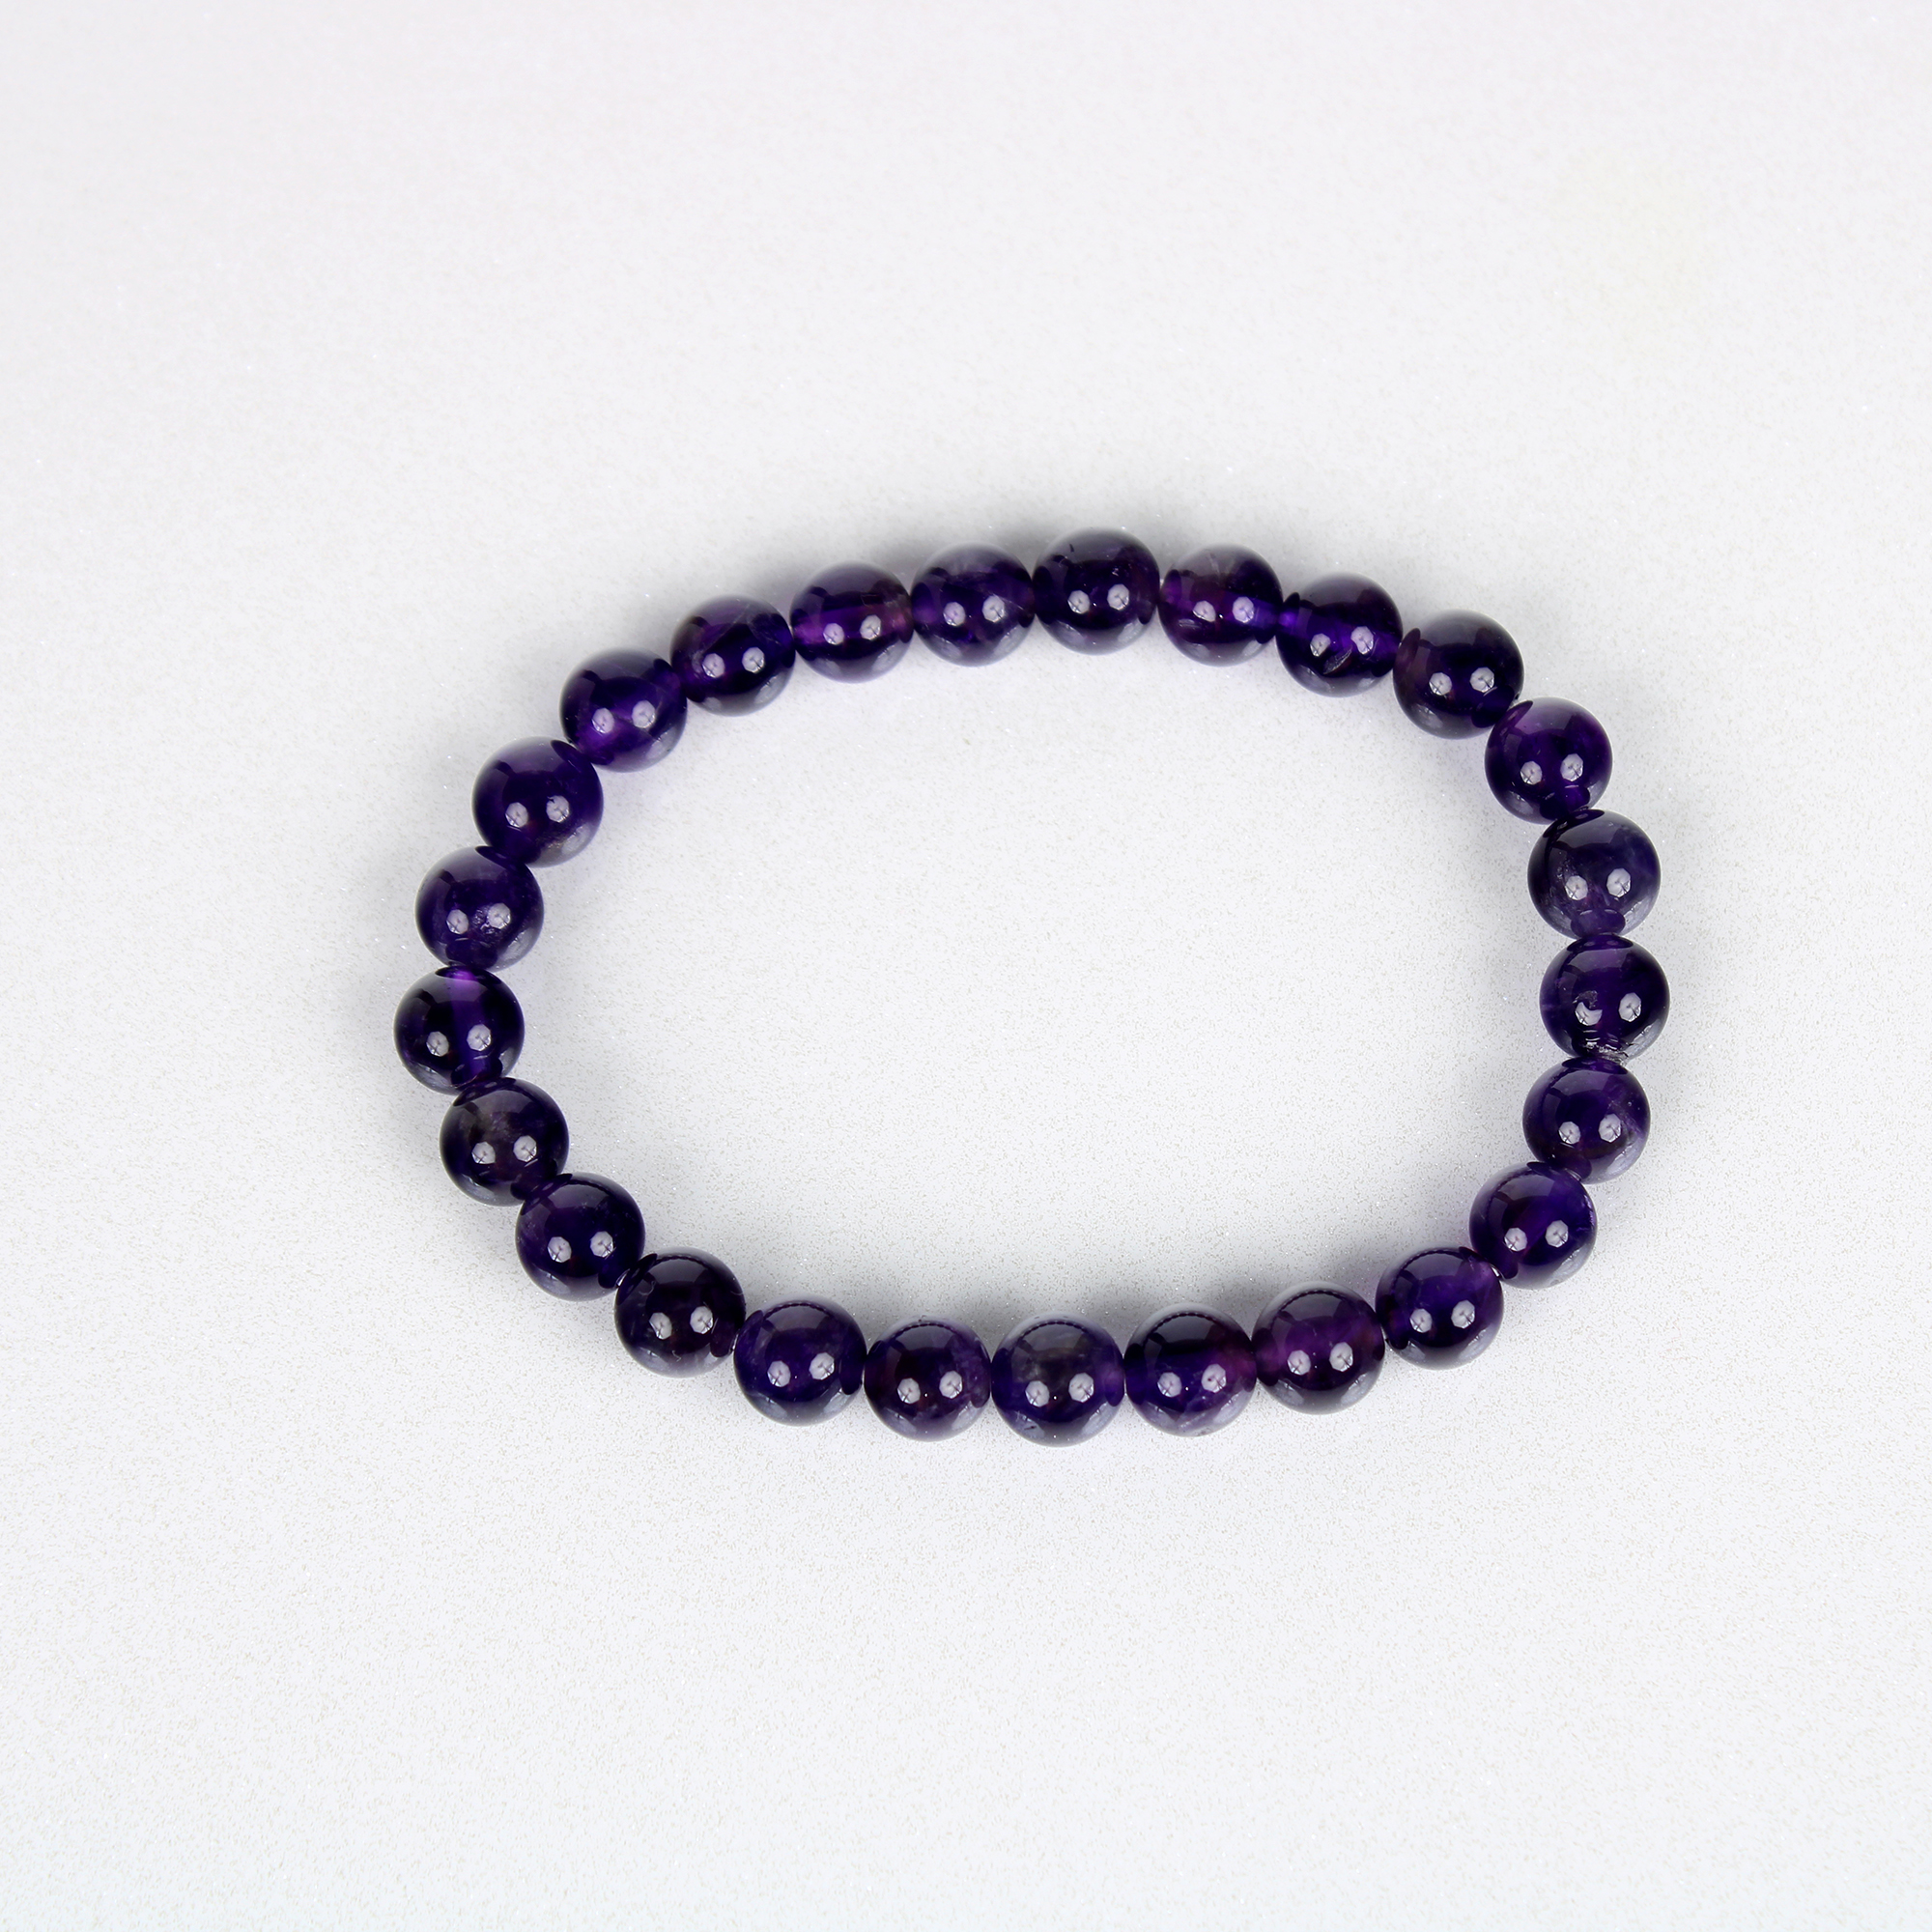 Purple amethyst bracelet with evil eye,February birthstone gift for  her,Boho Healing anxiety relief protection balancing calming gift · NY6  Design | Wholesale Beads online, Jewelry Making Supplies in Dallas suburb